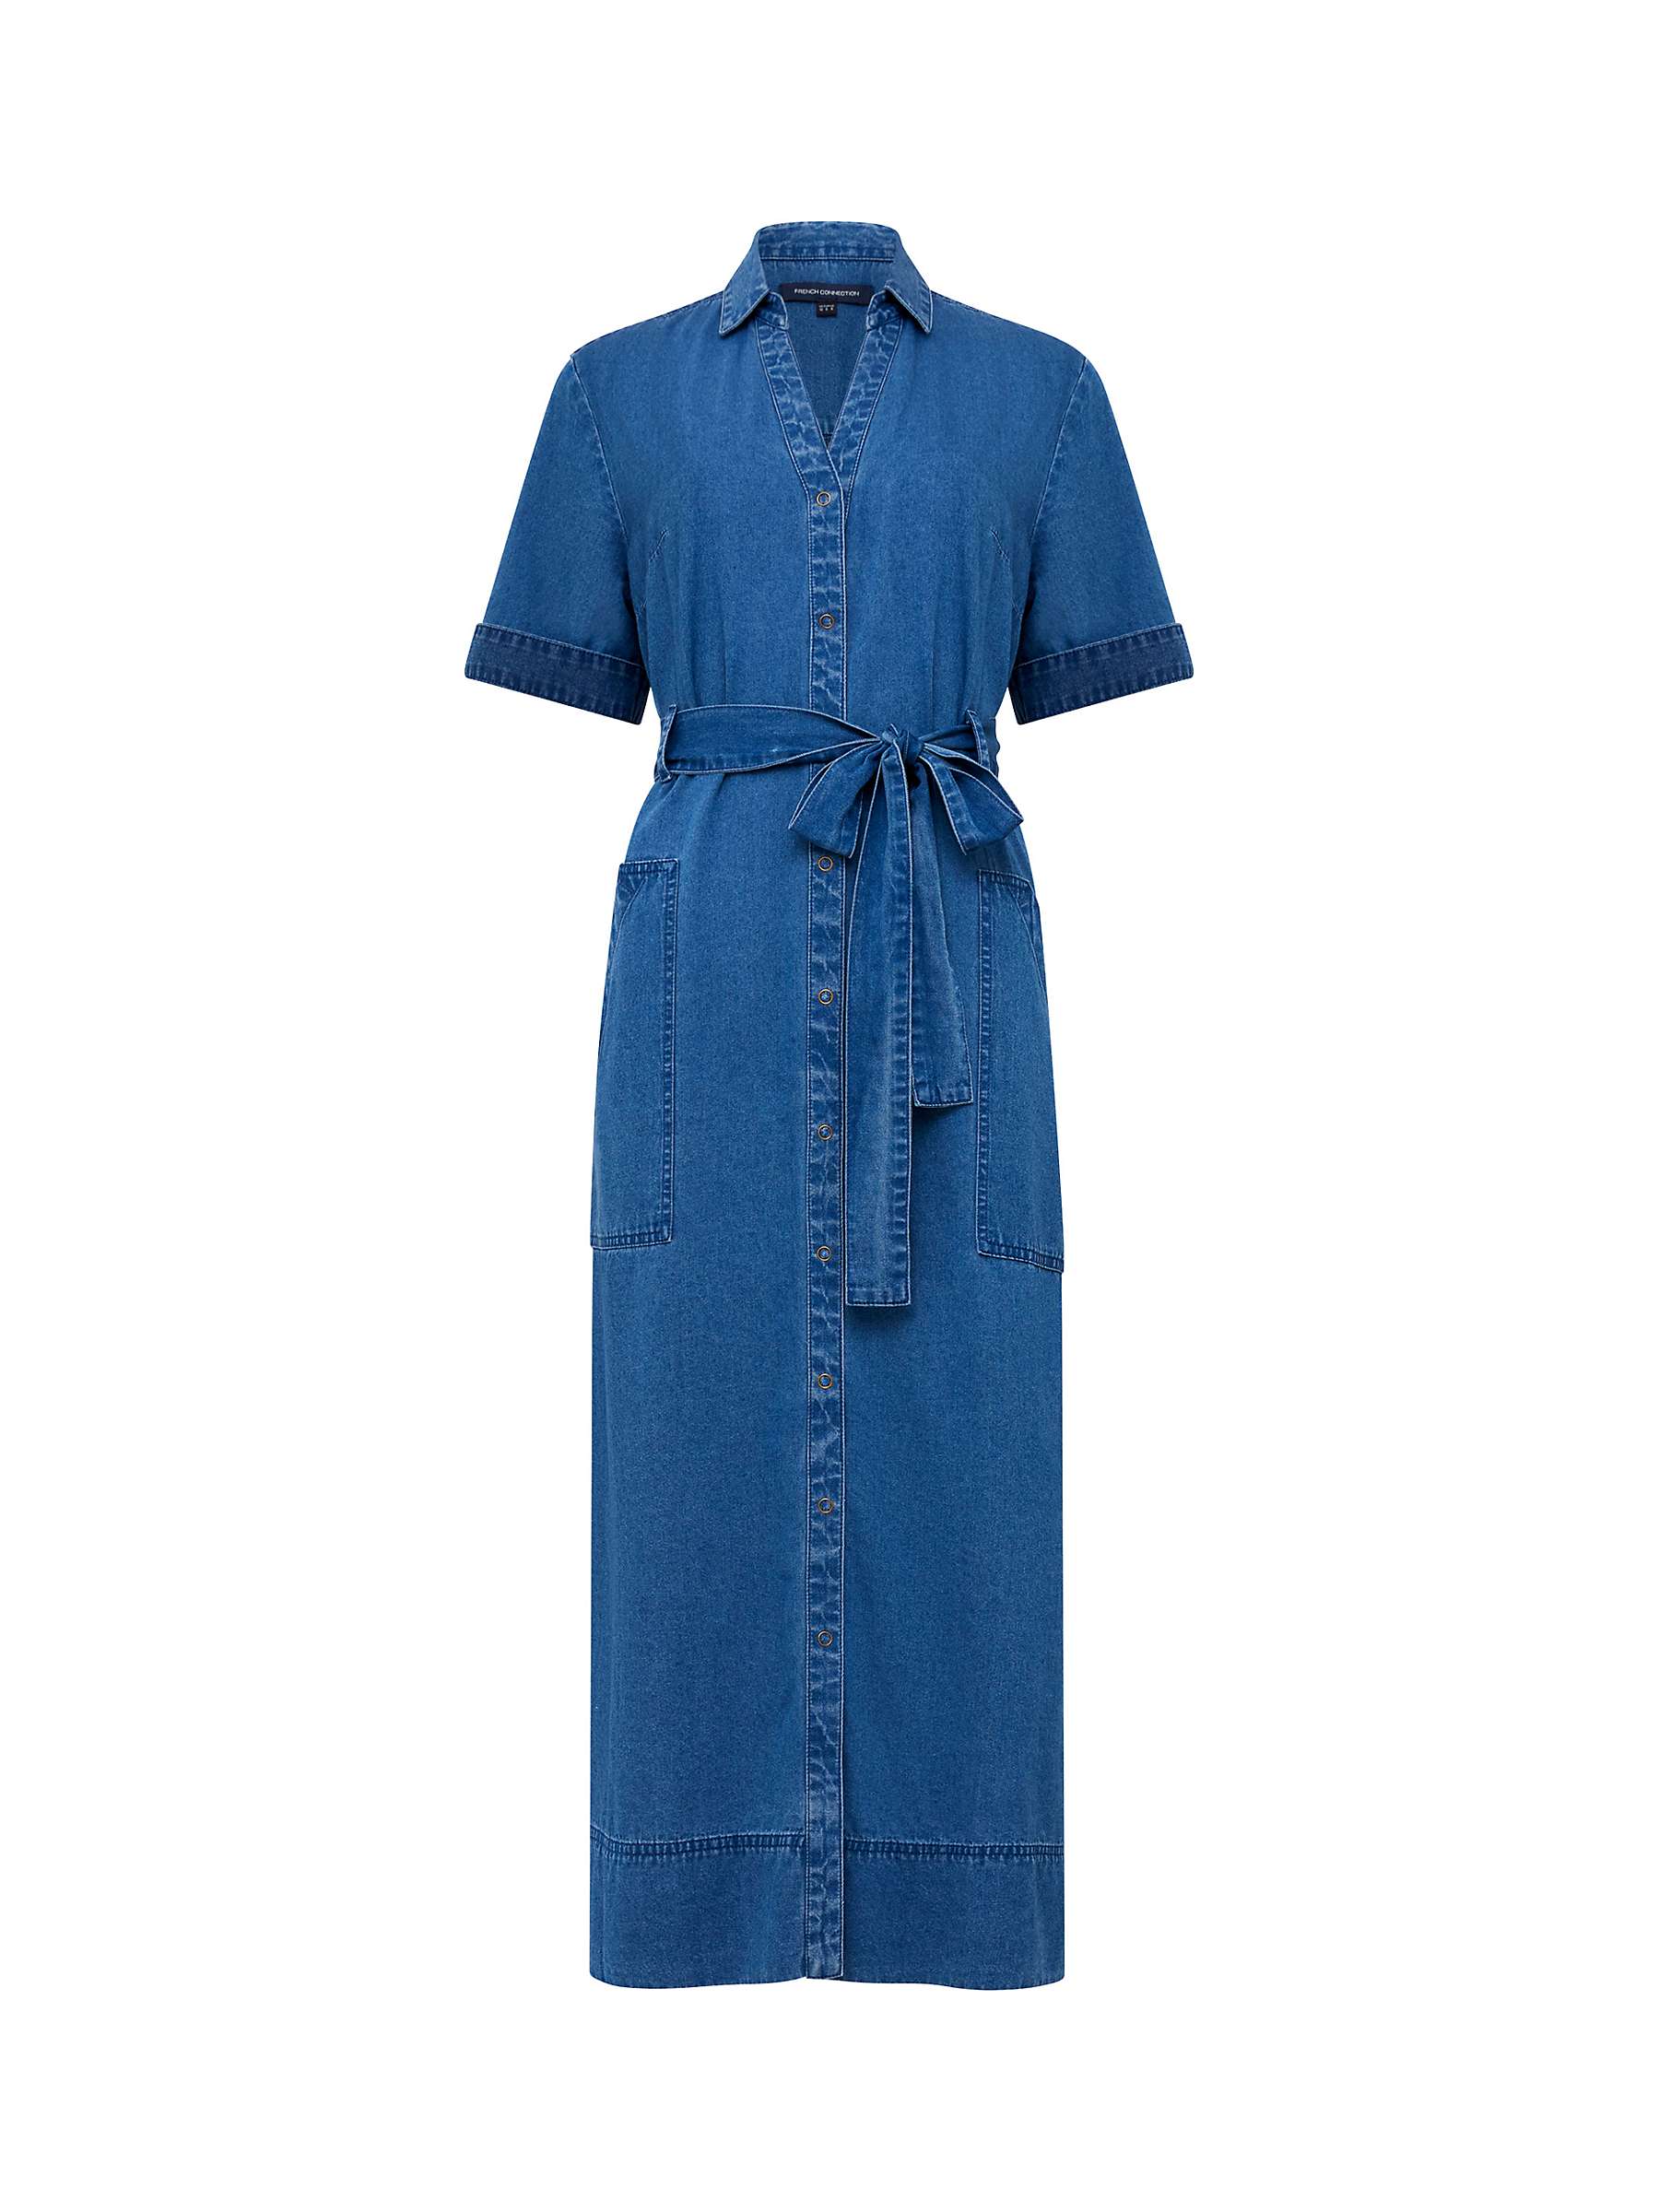 Buy French Connection Zaves Chambray Midi Shirt Dress, Light Vintage Online at johnlewis.com